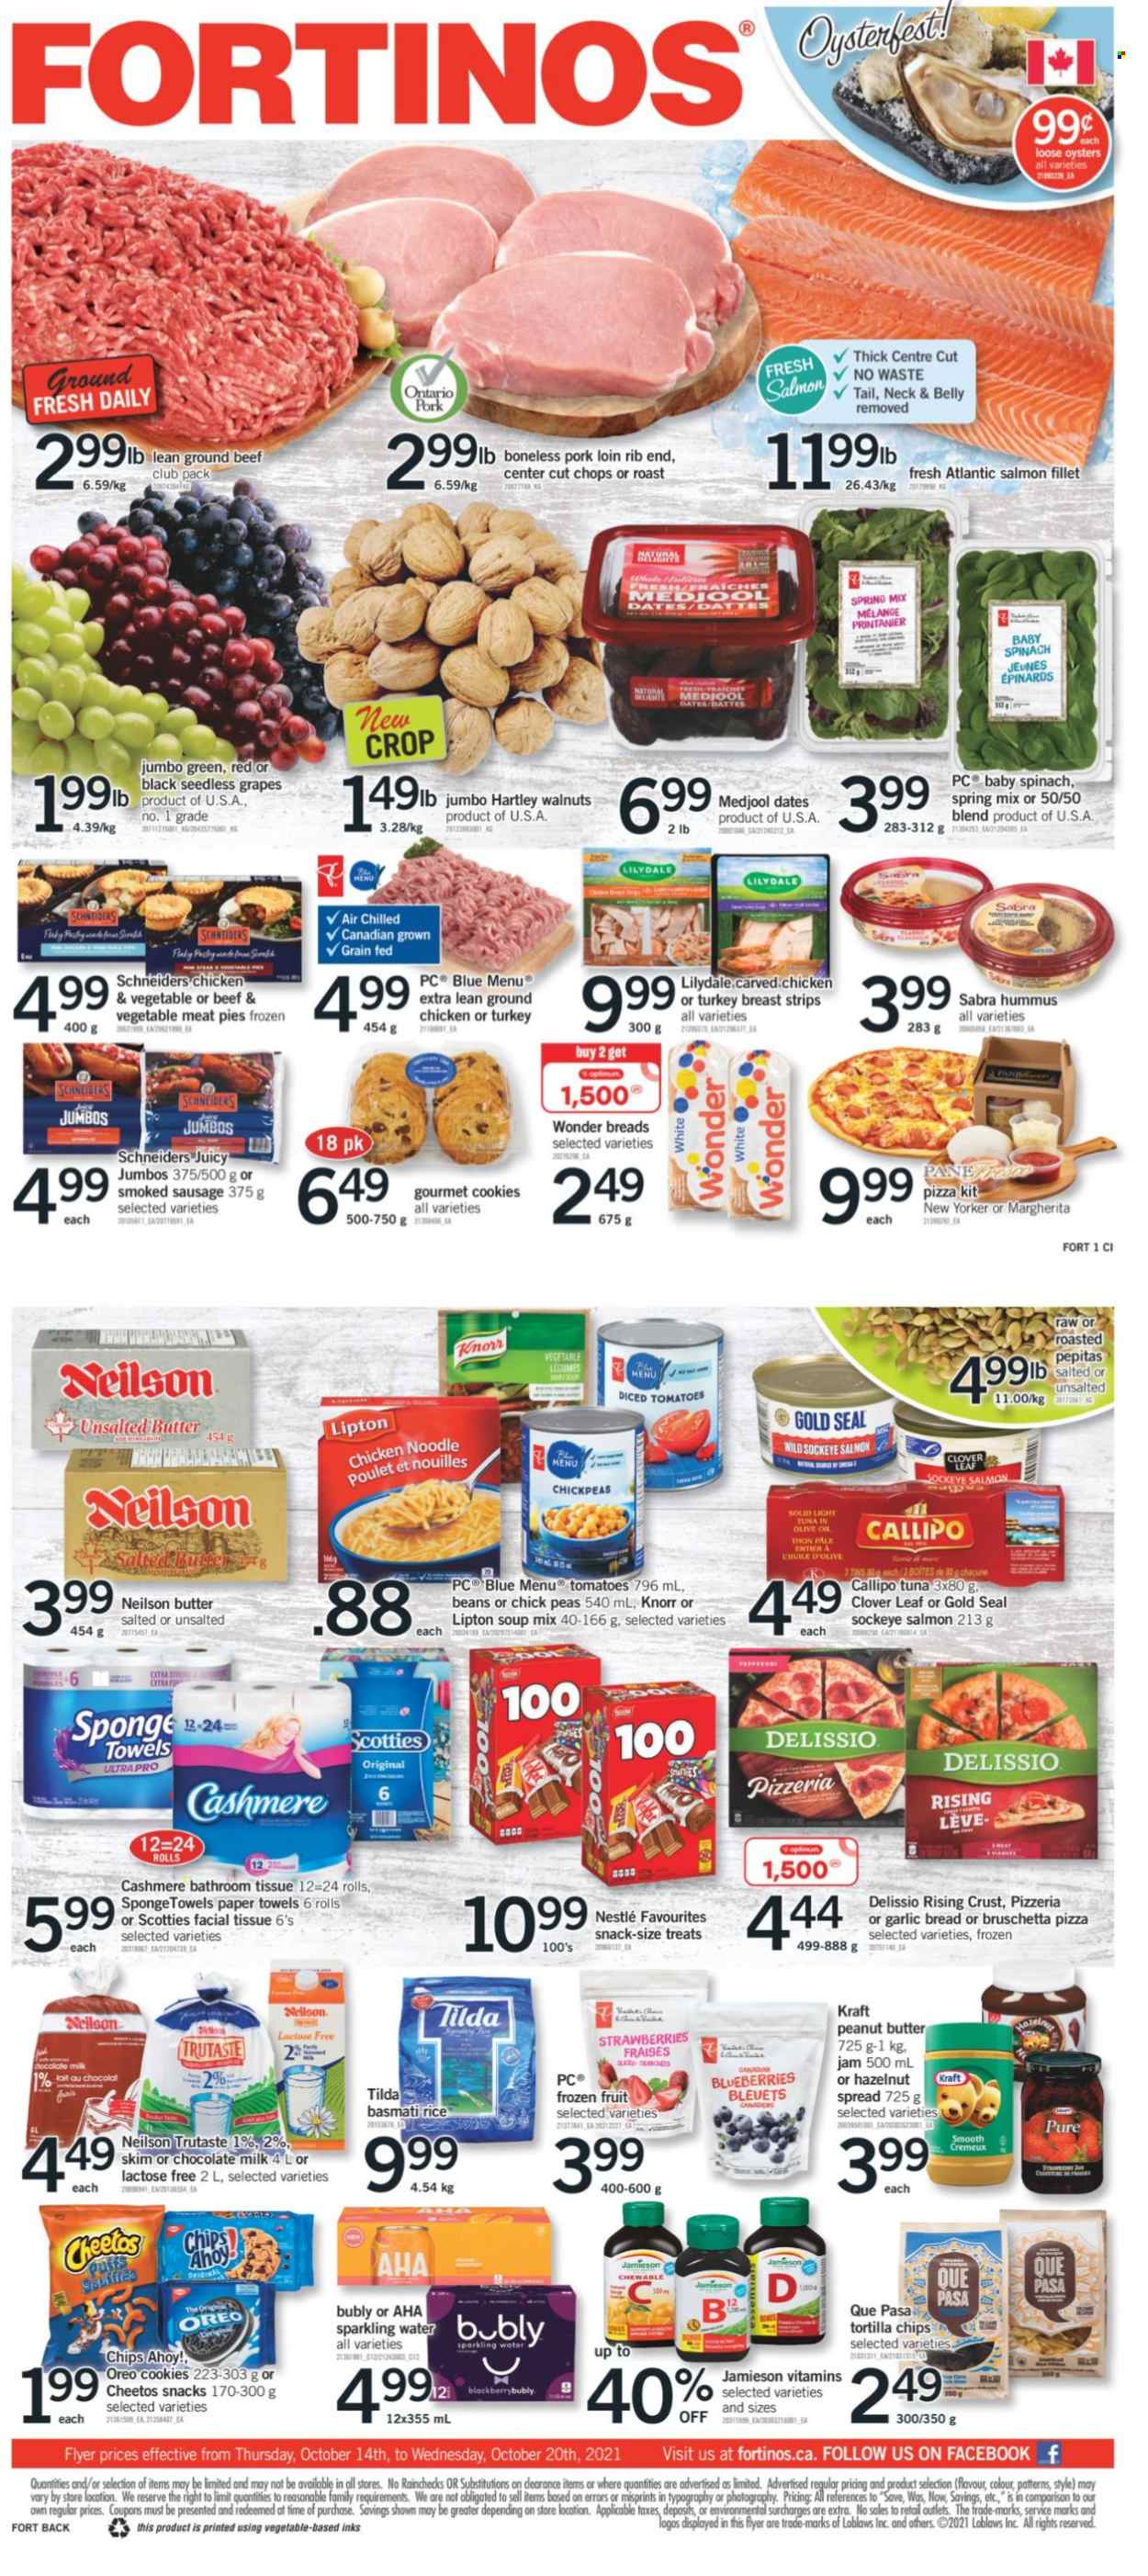 thumbnail - Fortinos Flyer - October 14, 2021 - October 20, 2021 - Sales products - bread, beans, peas, blueberries, grapes, seedless grapes, strawberries, salmon, salmon fillet, tuna, oysters, pizza, soup mix, soup, noodles, Kraft®, bruschetta, sausage, smoked sausage, hummus, Clover, milk, strips, cookies, milk chocolate, chocolate, snack, Chips Ahoy!, tortilla chips, Cheetos, light tuna, basmati rice, rice, chickpeas, fruit jam, peanut butter, hazelnut spread, walnuts, dried dates, sparkling water, ground chicken, turkey breast, chicken, turkey, beef meat, ground beef, pork loin, pork meat, bath tissue, kitchen towels, paper towels, sponge, pan, Knorr, Oreo, Nestlé, Lipton. Page 1.